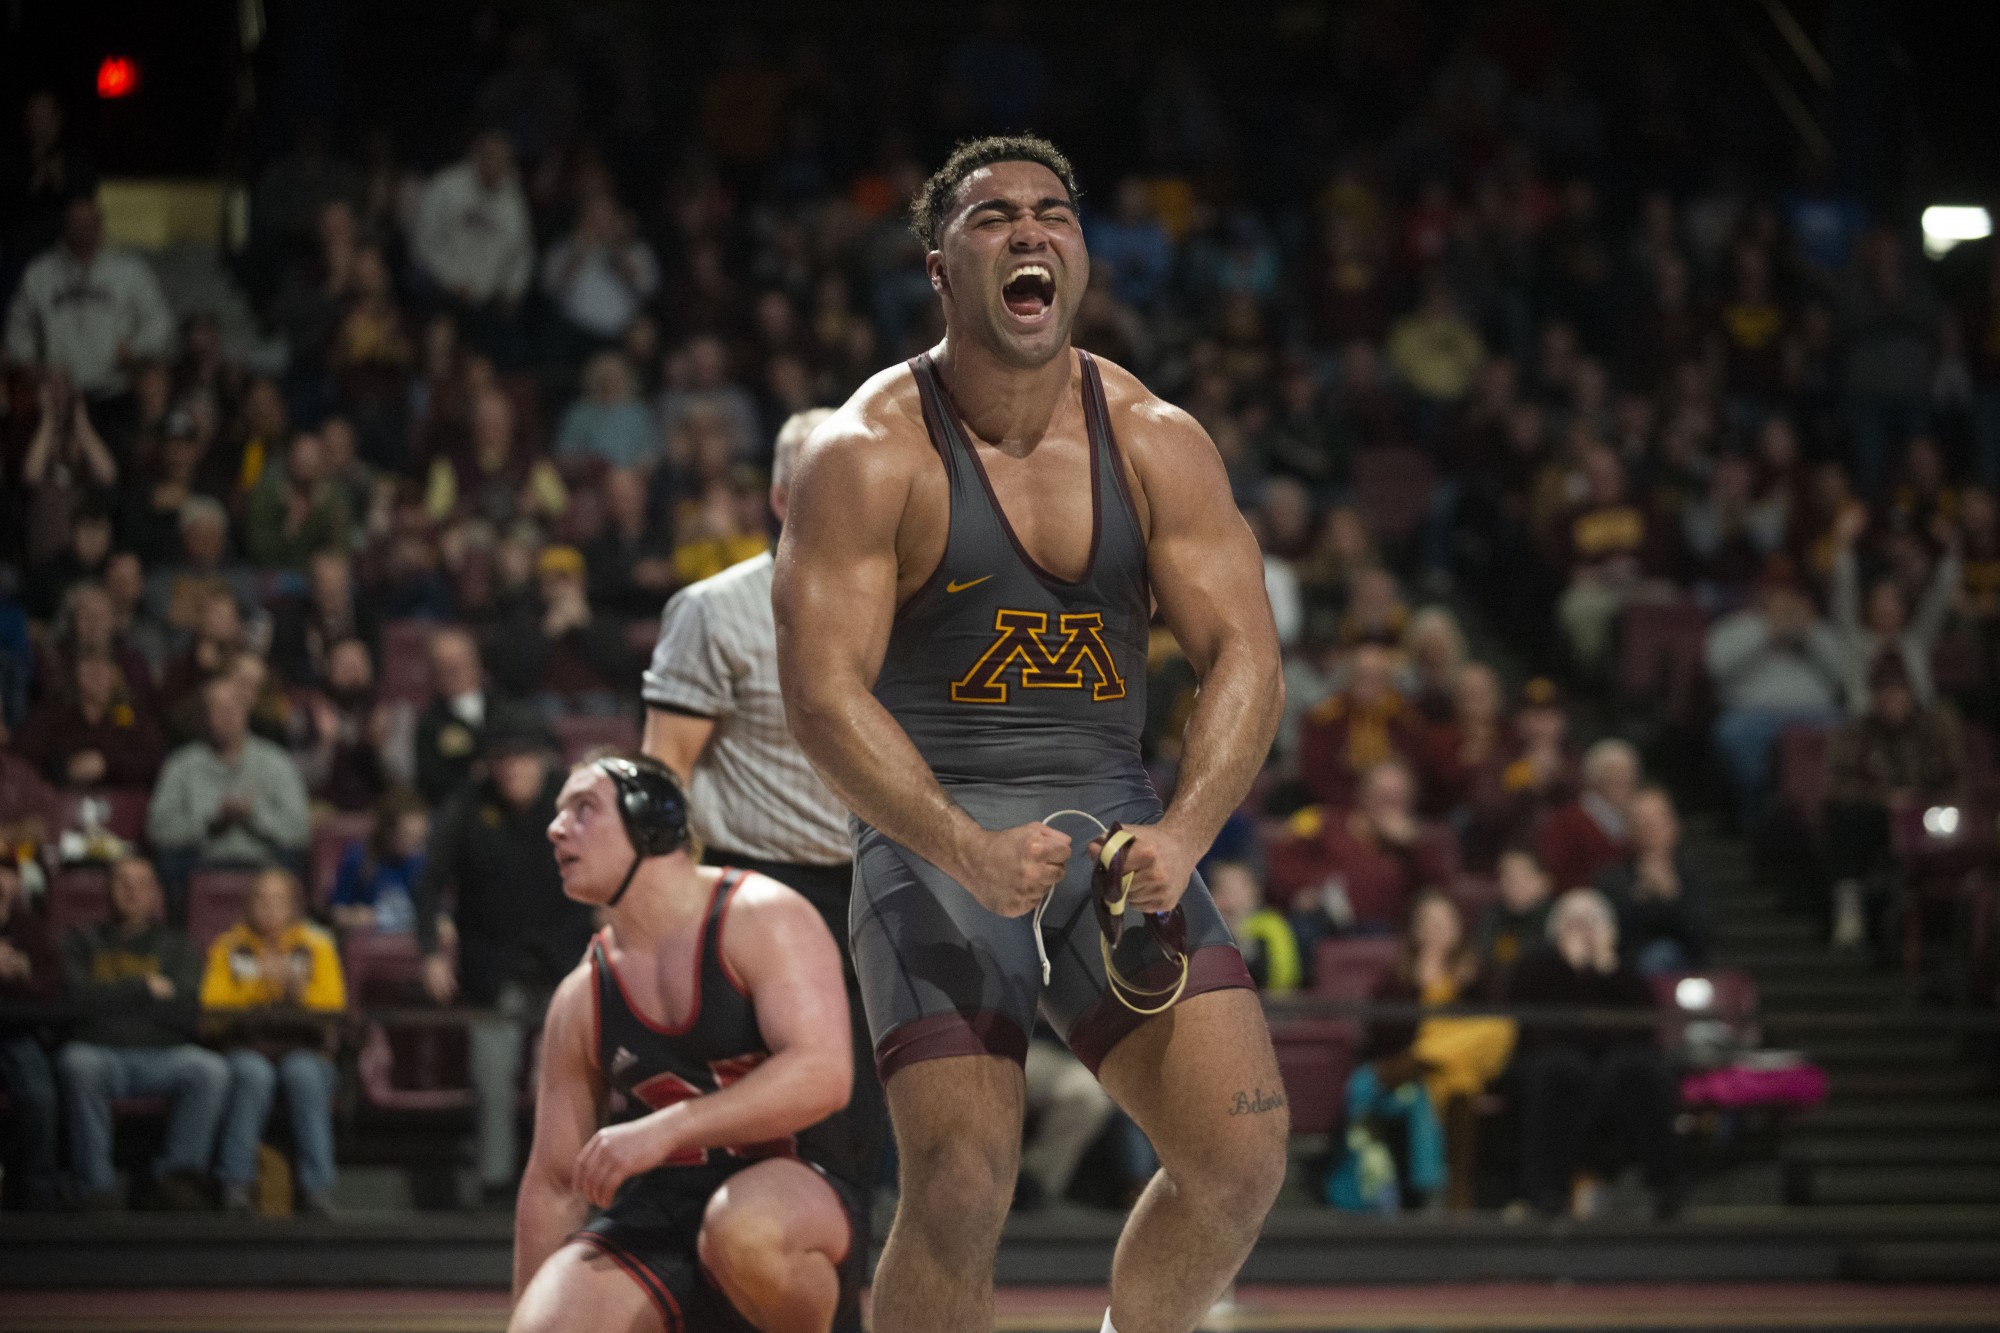 Gable Steveson celebrates after a winning a match during the meet against Nebraska at the Maturi Pavilion on Friday, Feb. 21, 2020. 